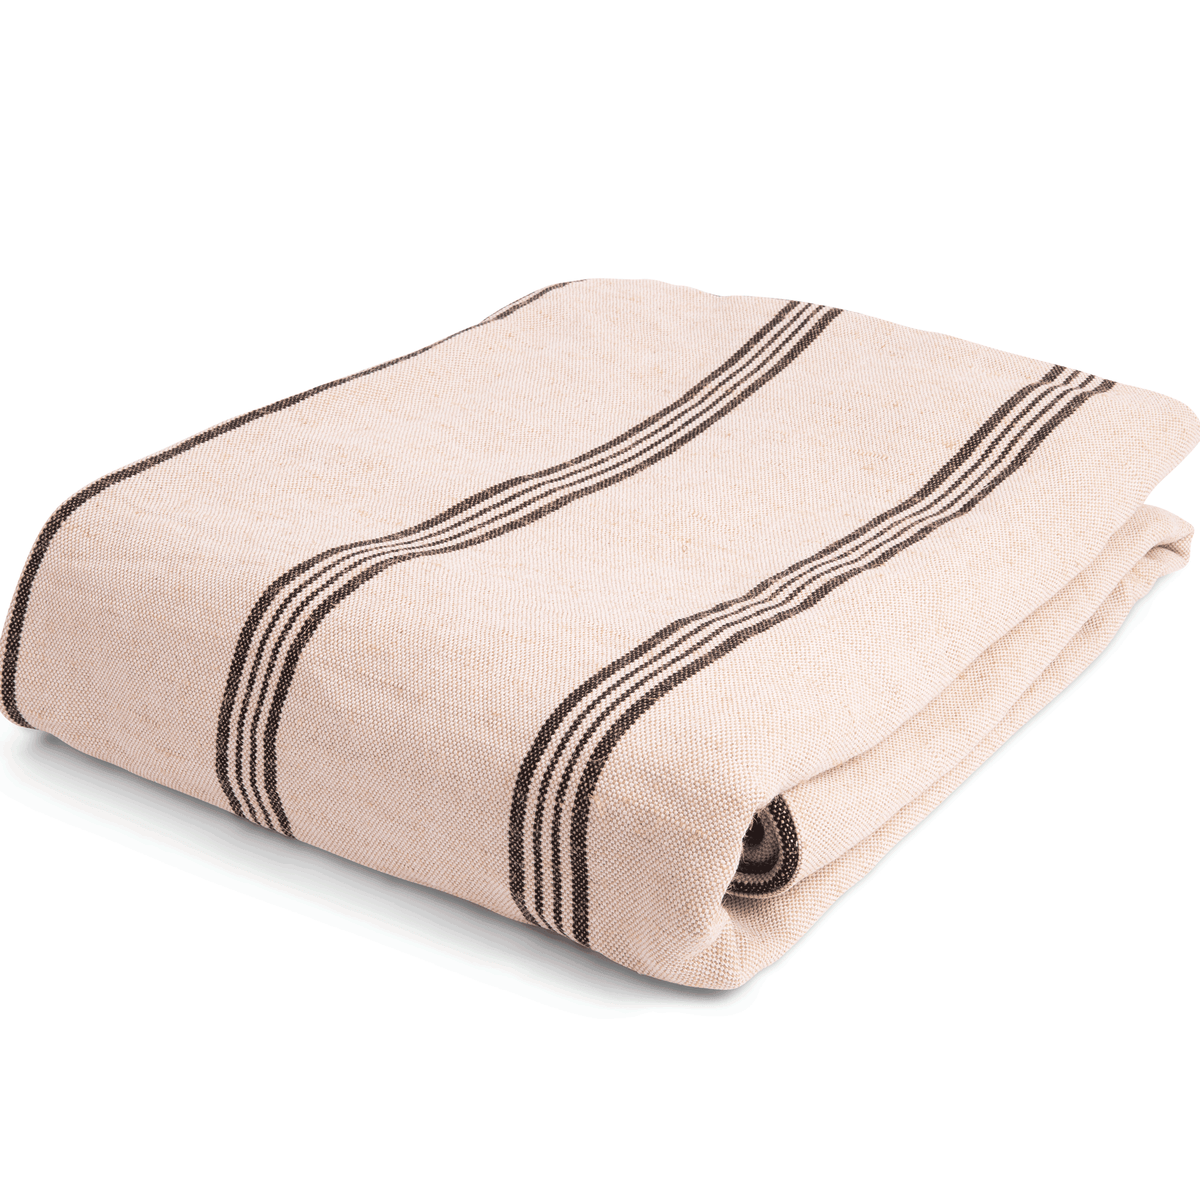 Grain Sack Rectangle Dog Bed Cover